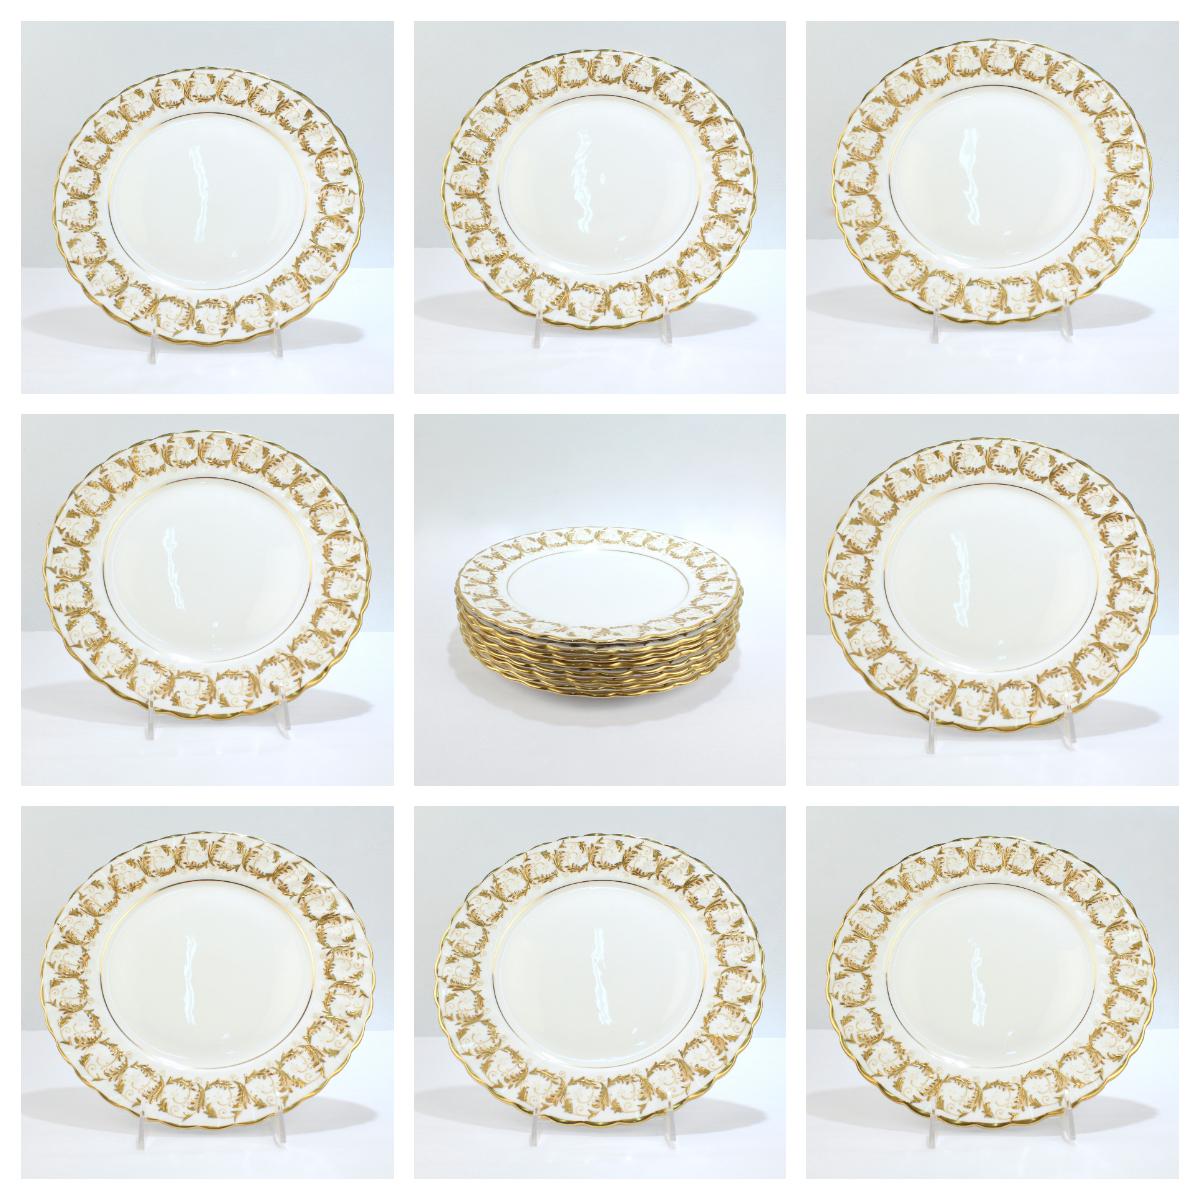 A fine set of 8 bone china dinner plates by Gladstone.

With a scalloped border and 2 tone raised gold decoration to the borders. 

A thin gilt line outlines the interior of the plate.

Simply a lovely set that is perfect for a table of